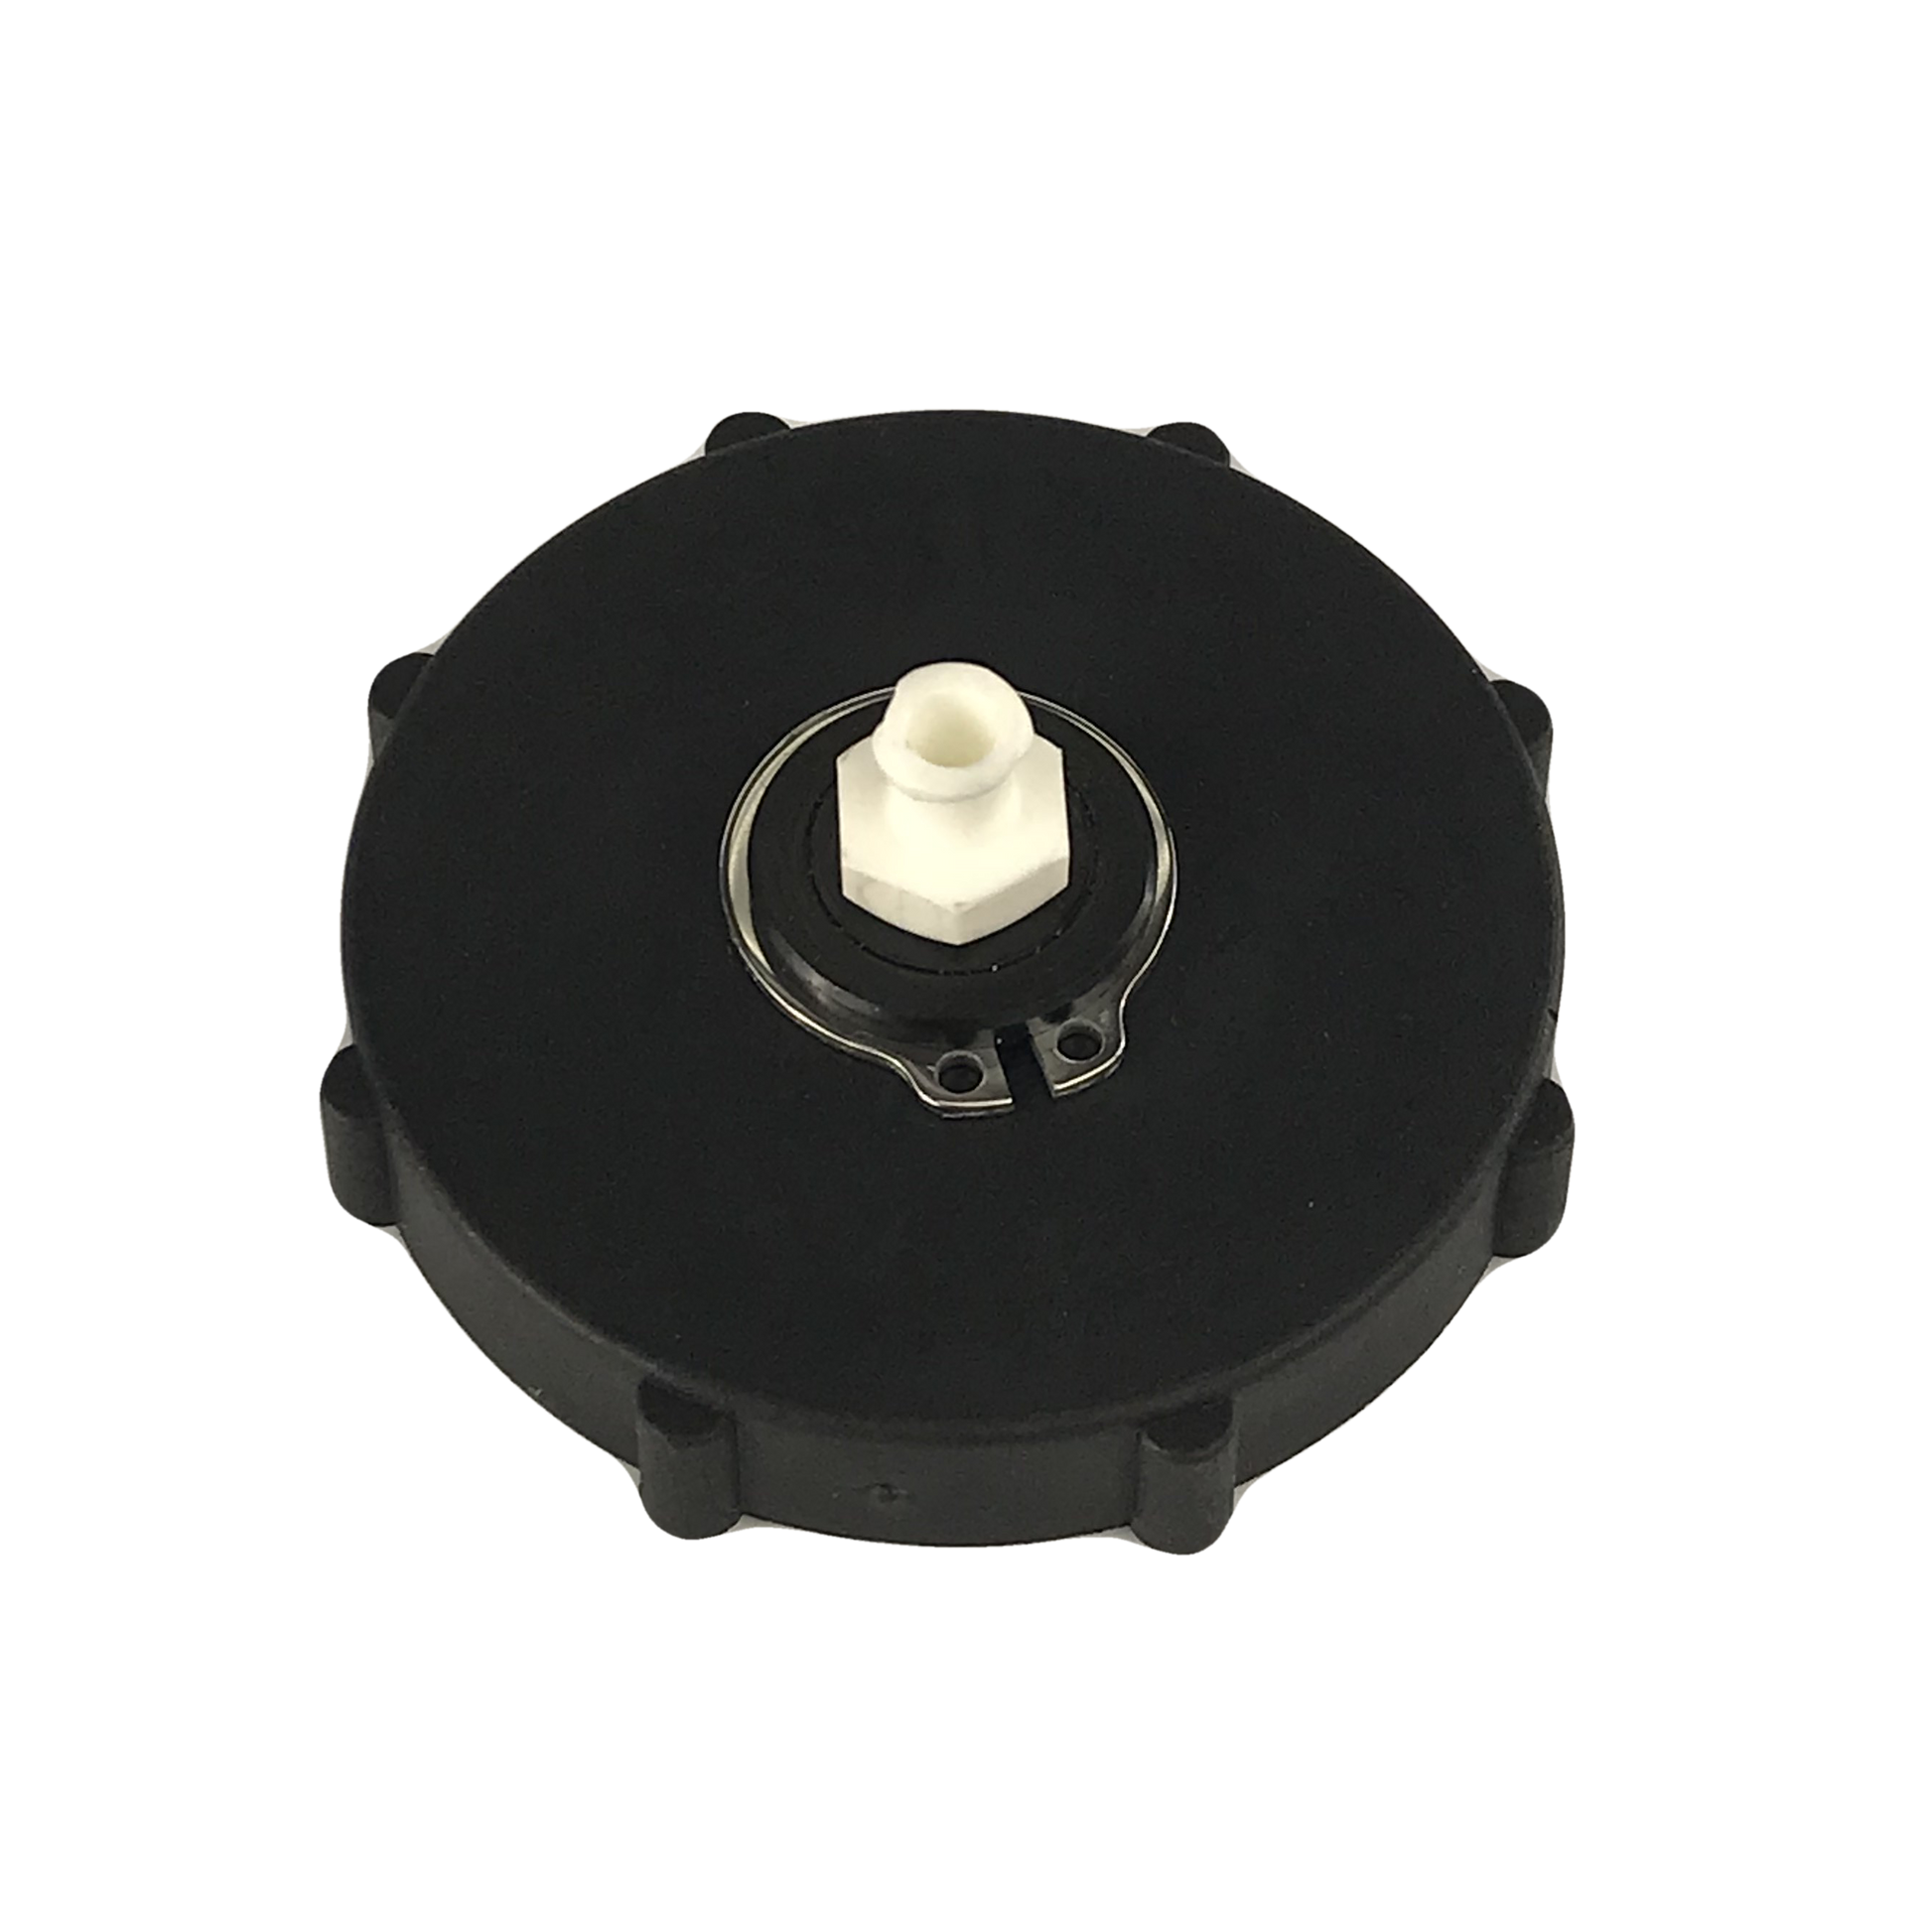 Black BC-03 Master Cylinder Cap Adapter with a white threaded top sits on a gray background. The adapter is designed for bleeding the brakes on Nissan and most late model GM vehicles. It is a low-pressure adapter, designed for 15-17 psi. It is made of durable plastic and is easy to install. The adapter creates a good seal on the master cylinder reservoir and is easy to identify with its  threaded top.